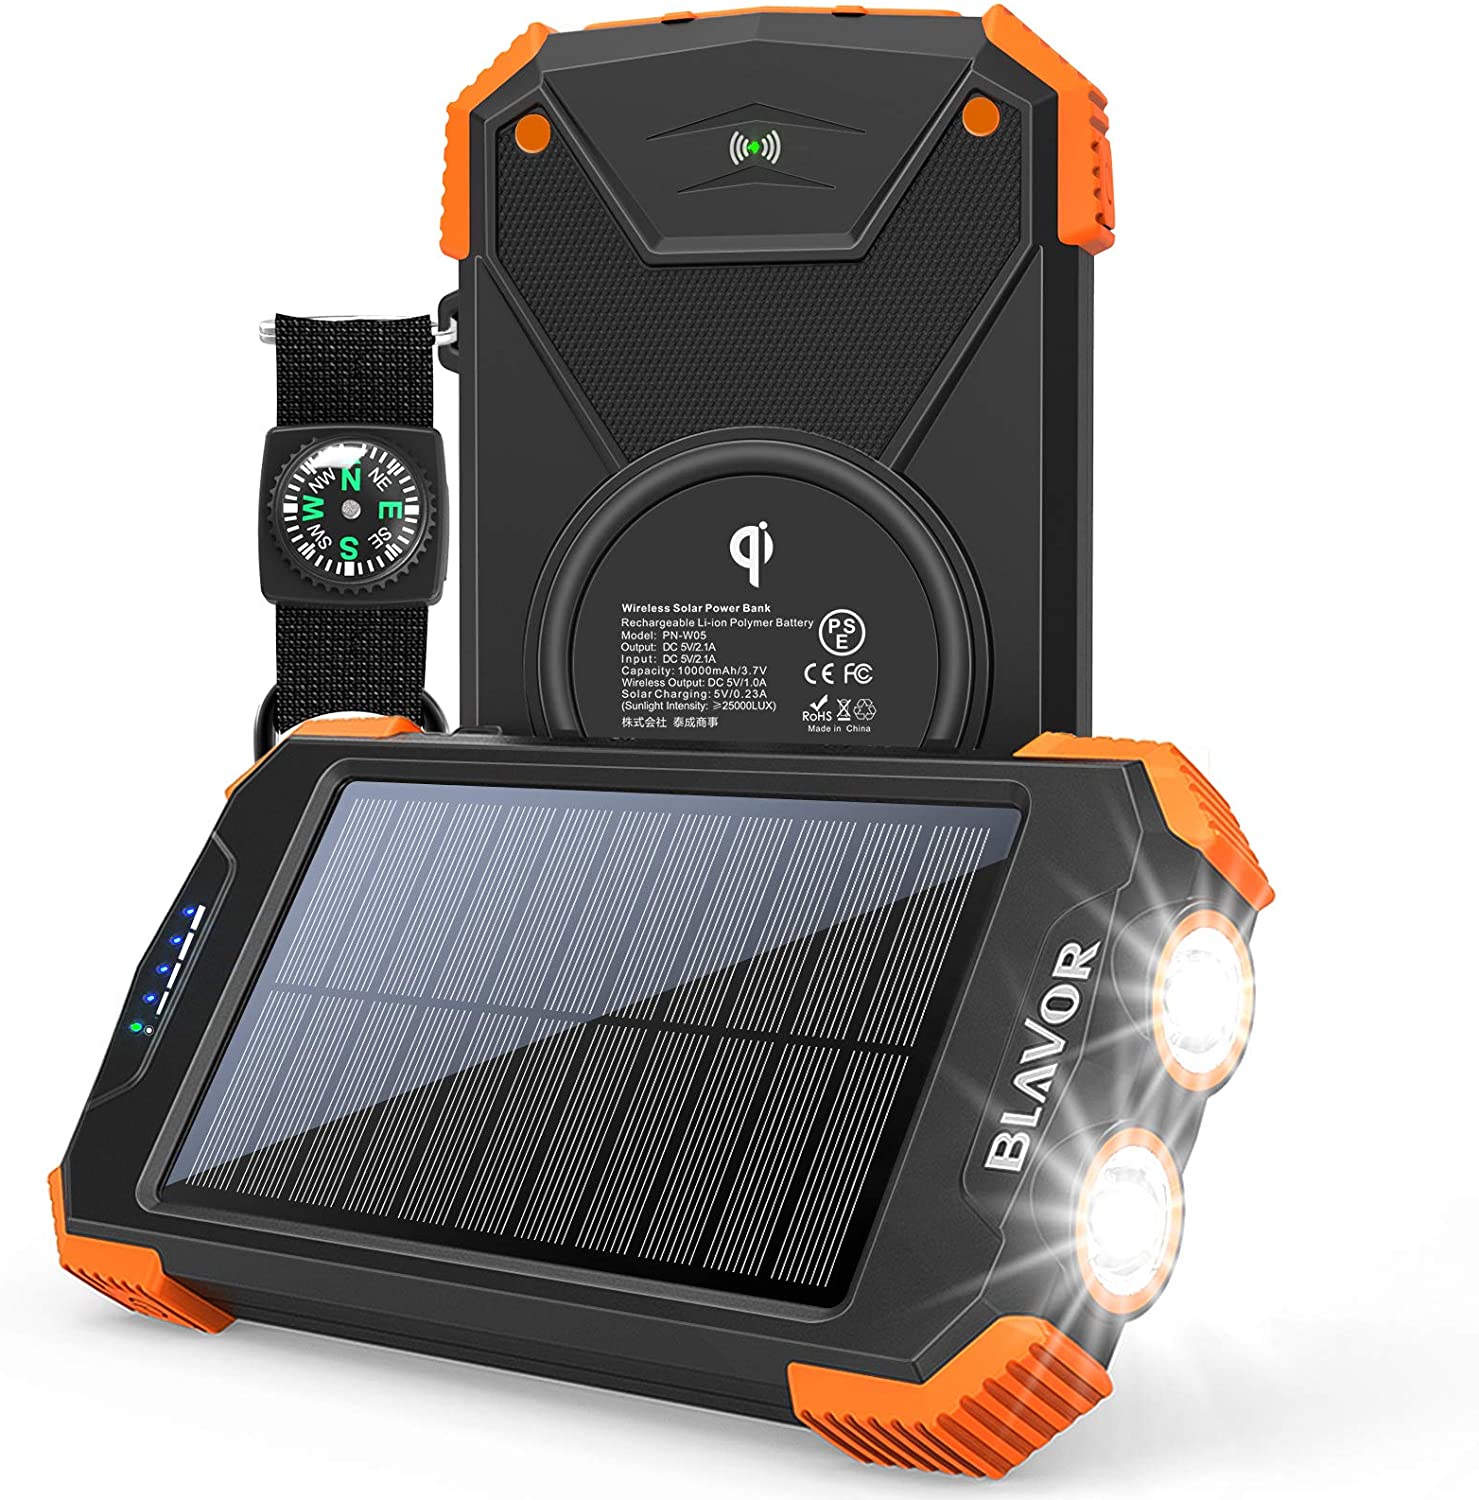 Best Solar Phone Chargers in 2020